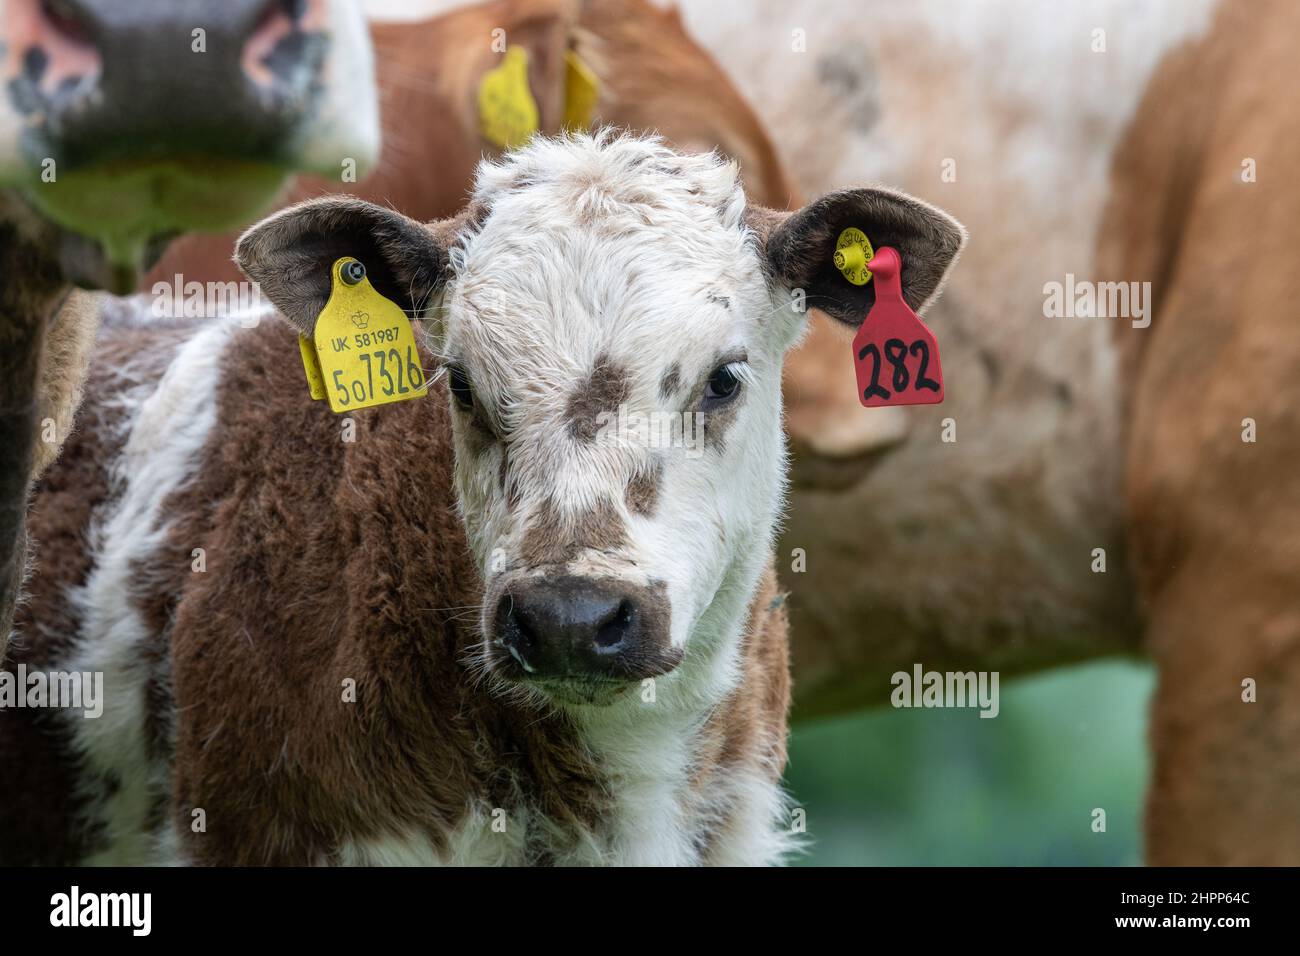 Young calf with big ear tags in to aid identification, Scotland, UK. Stock Photo